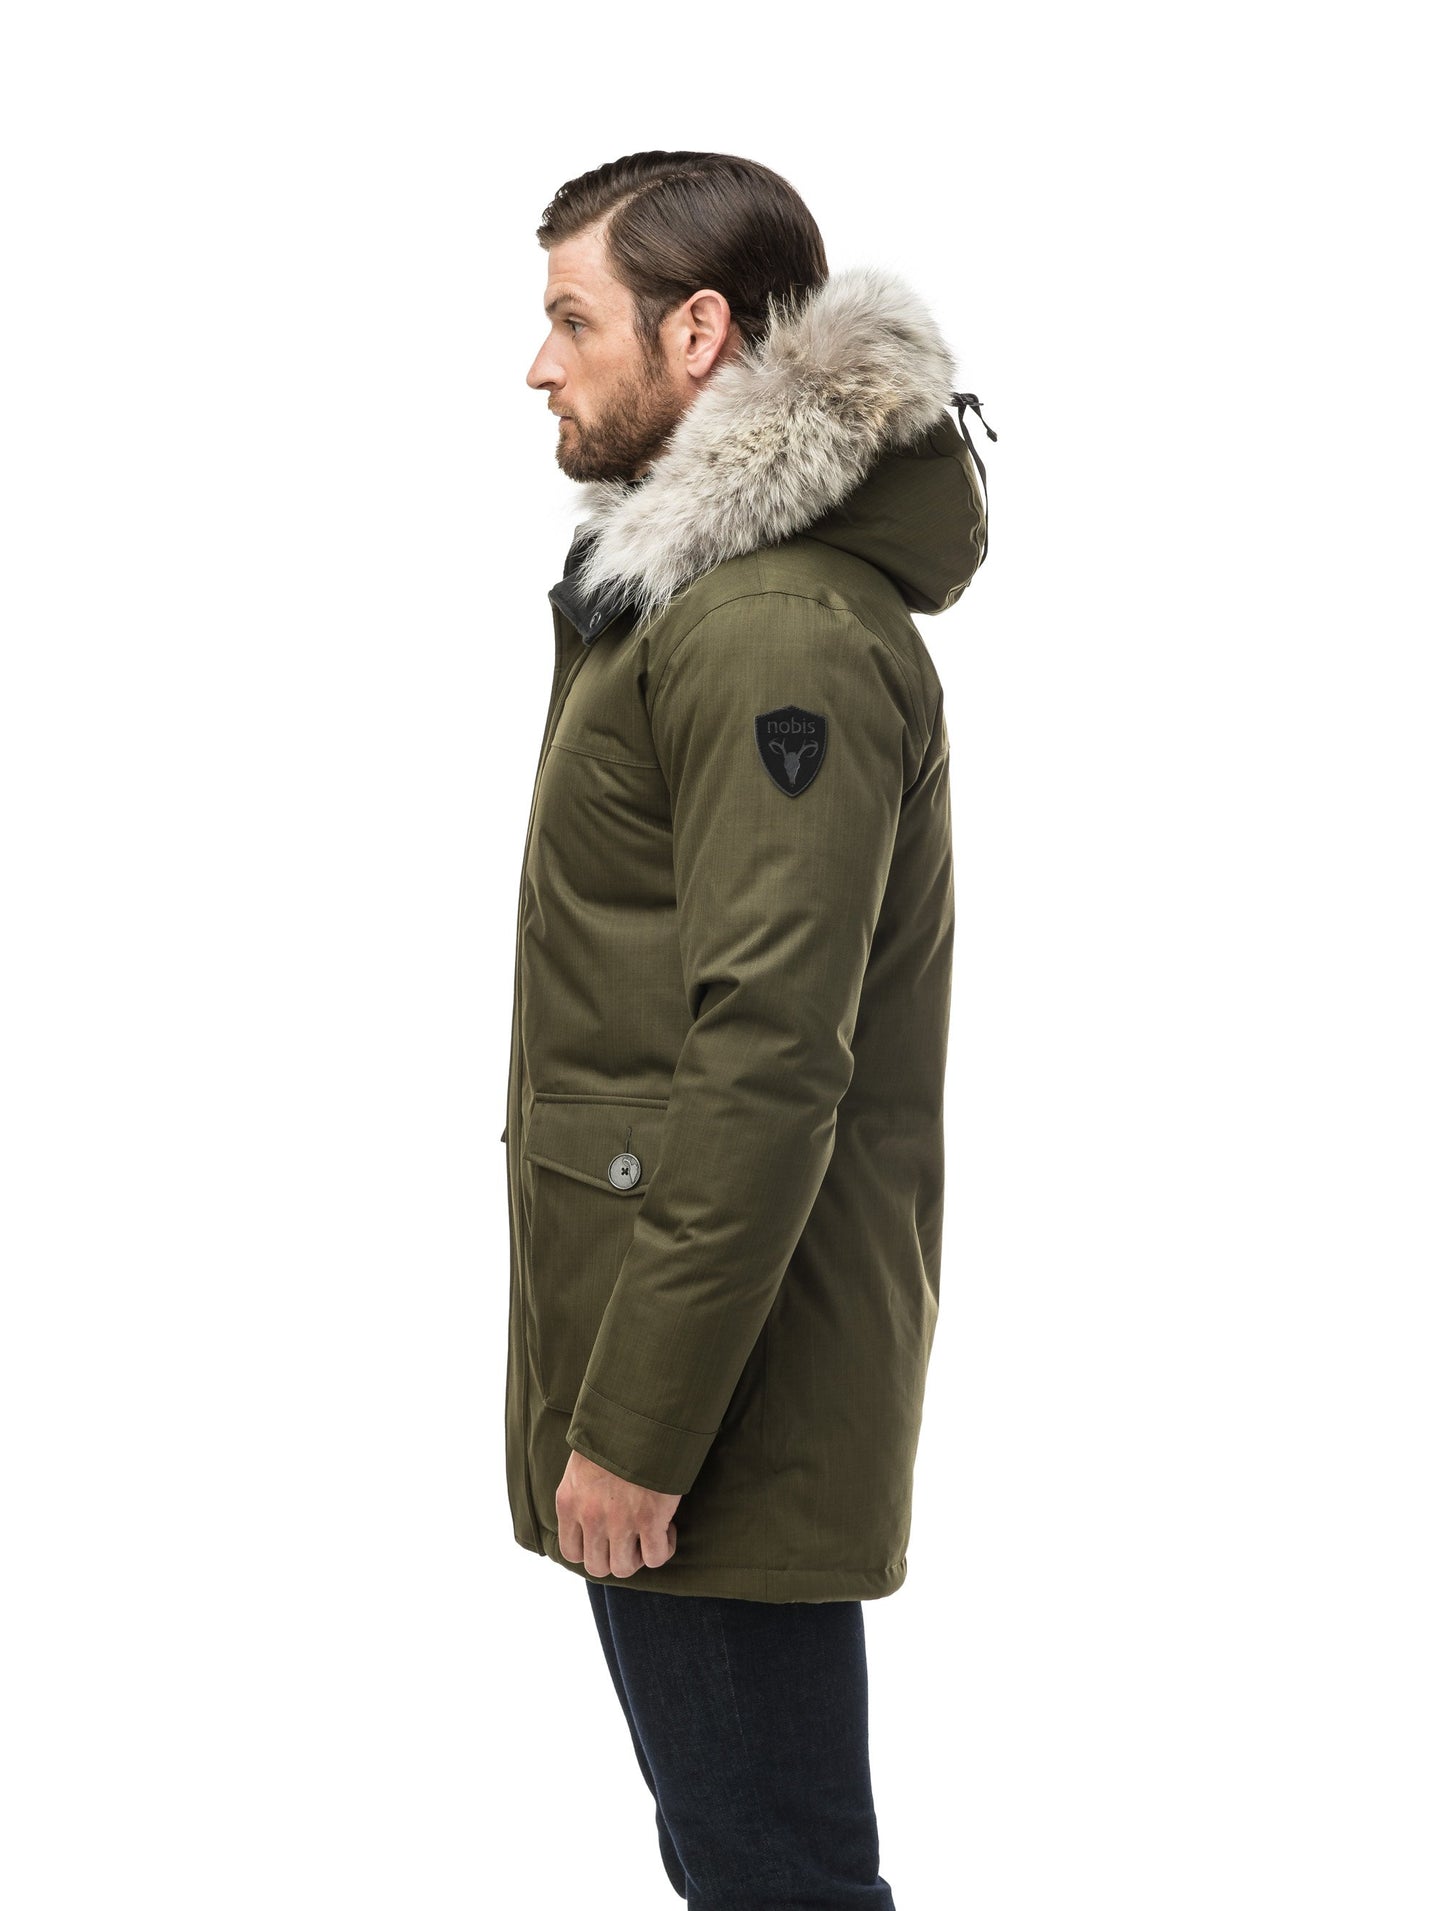 Men's slim fitting waist length parka with removable fur trim on the hood and two waist patch pockets in CH Fatigue